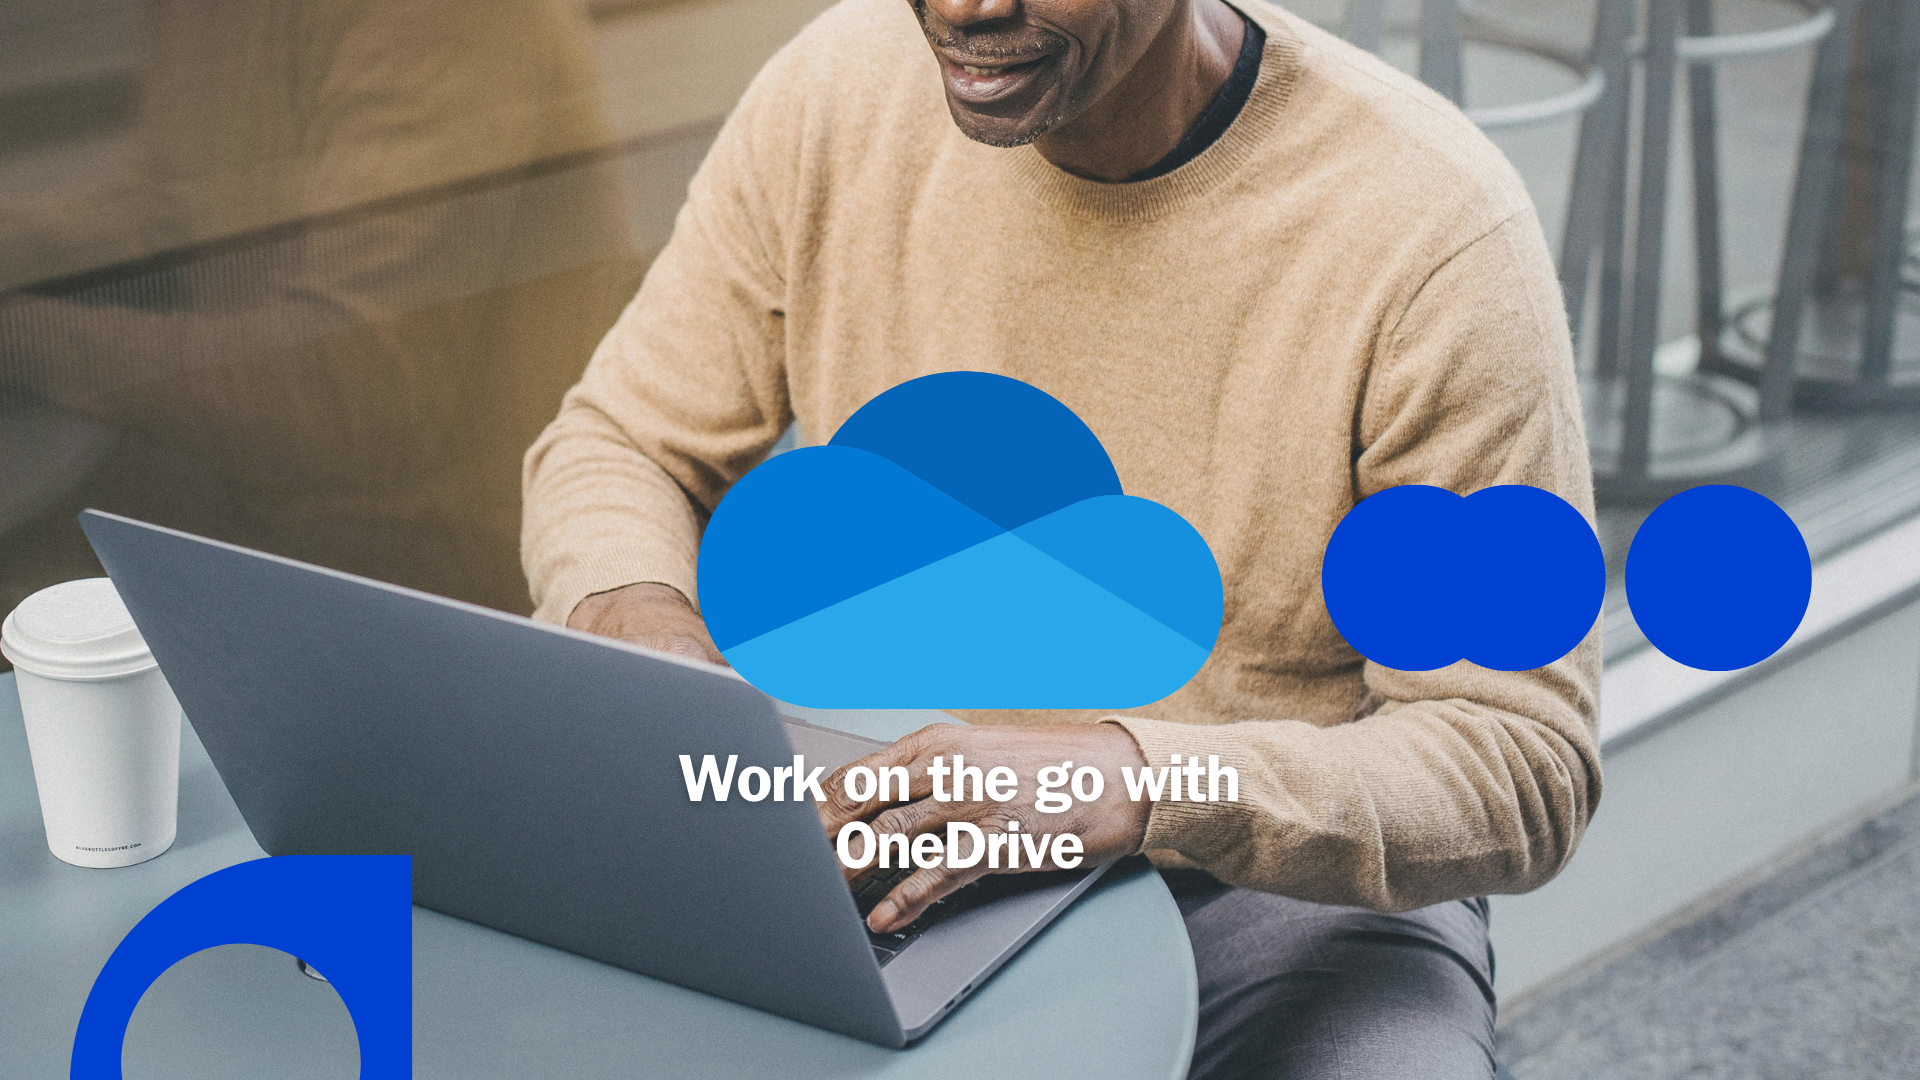 How To Use OneDrive To Work on the Go